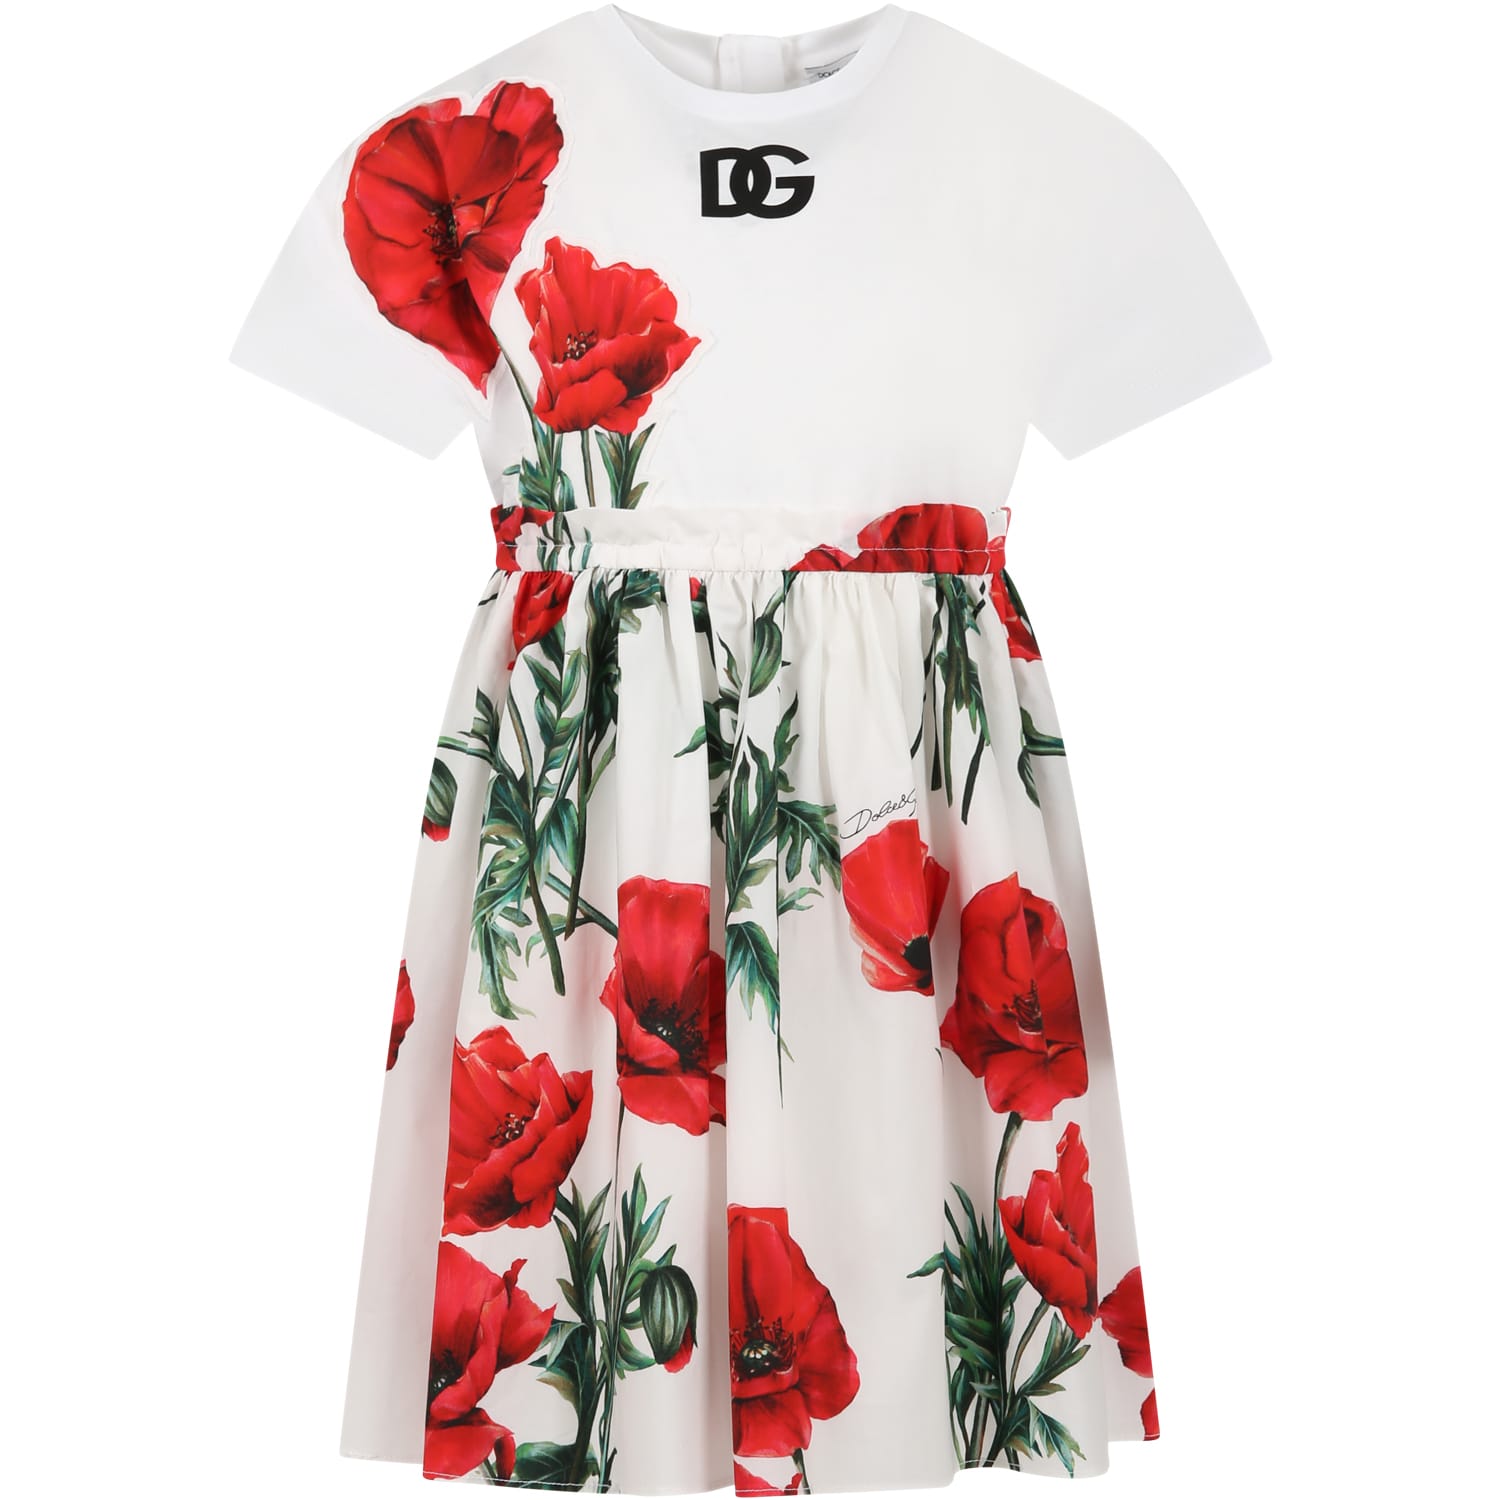 DOLCE & GABBANA WHITE DRESS FOR GIRL WITH POPPIES PRINT AND LOGO